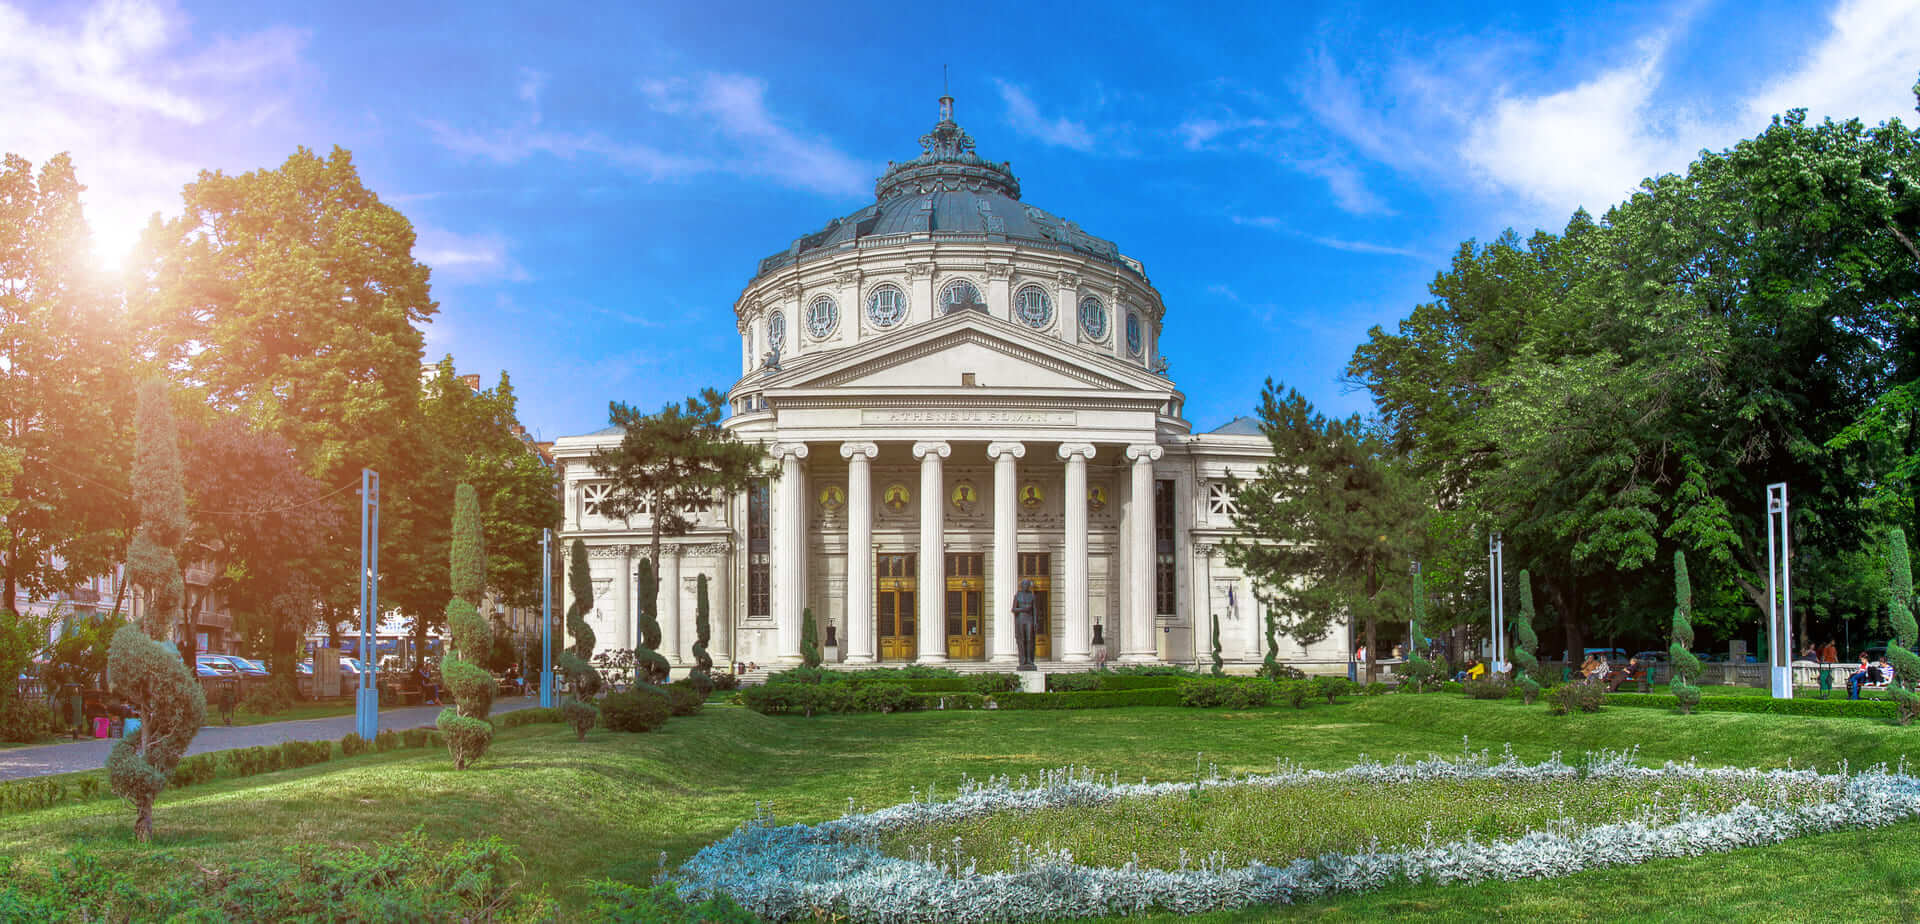 Panorama of The Romanian Athenaeum George Enescu (Ateneul Roman) in Bucharest, Romania. Most prestigious concert hall and one of the most beautiful buildings in the city. the famous landmark
